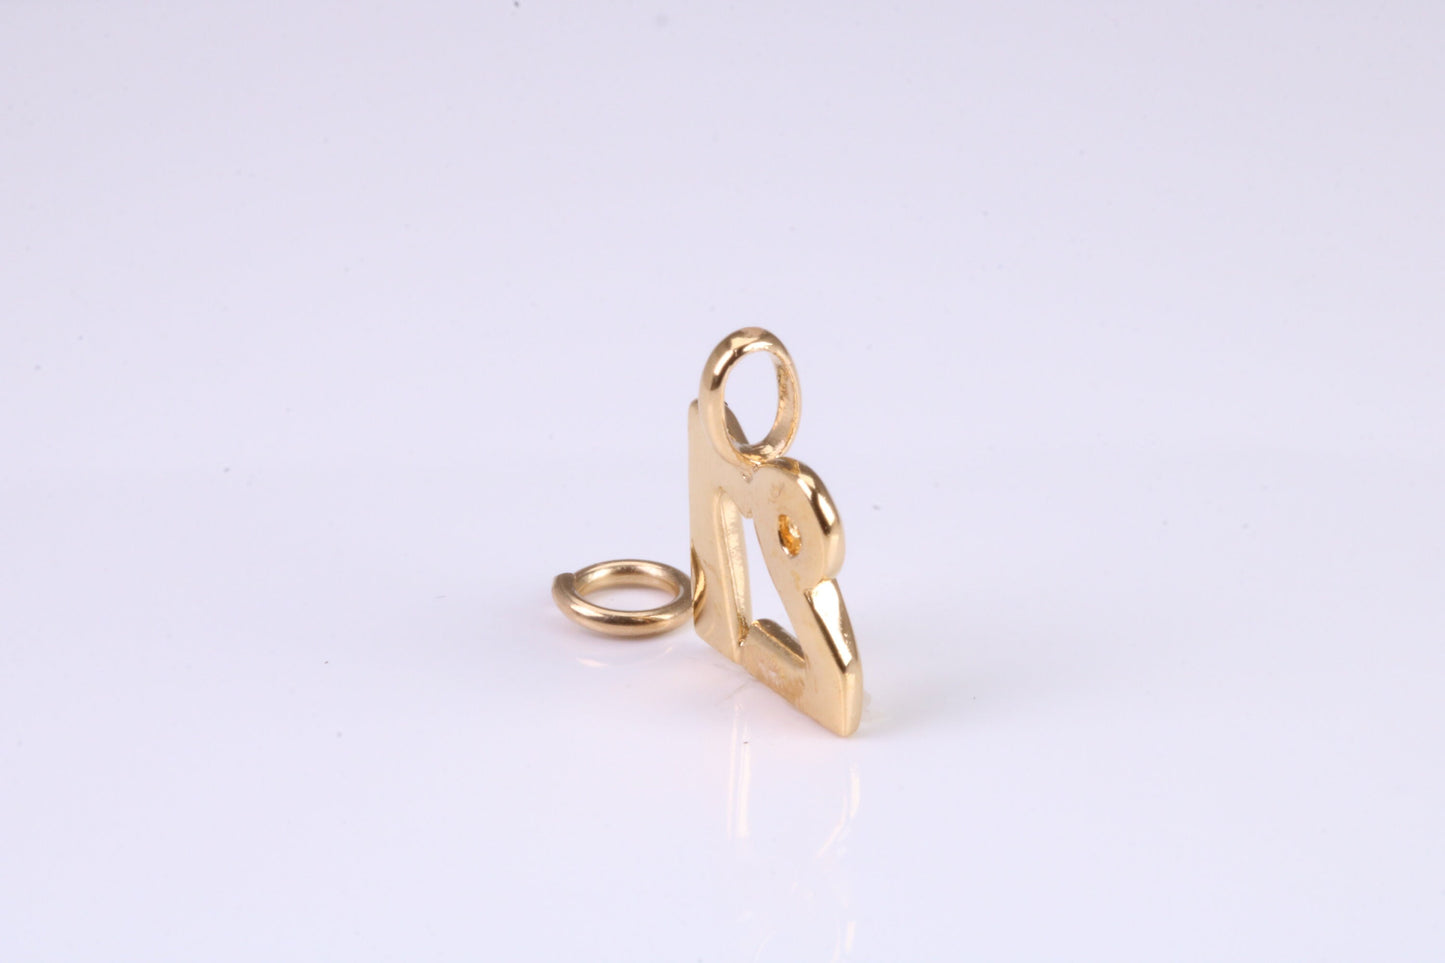 21st Birthday Charm, Traditional Charm, Made from Solid Yellow Gold, British Hallmarked, Complete with Attachment Link